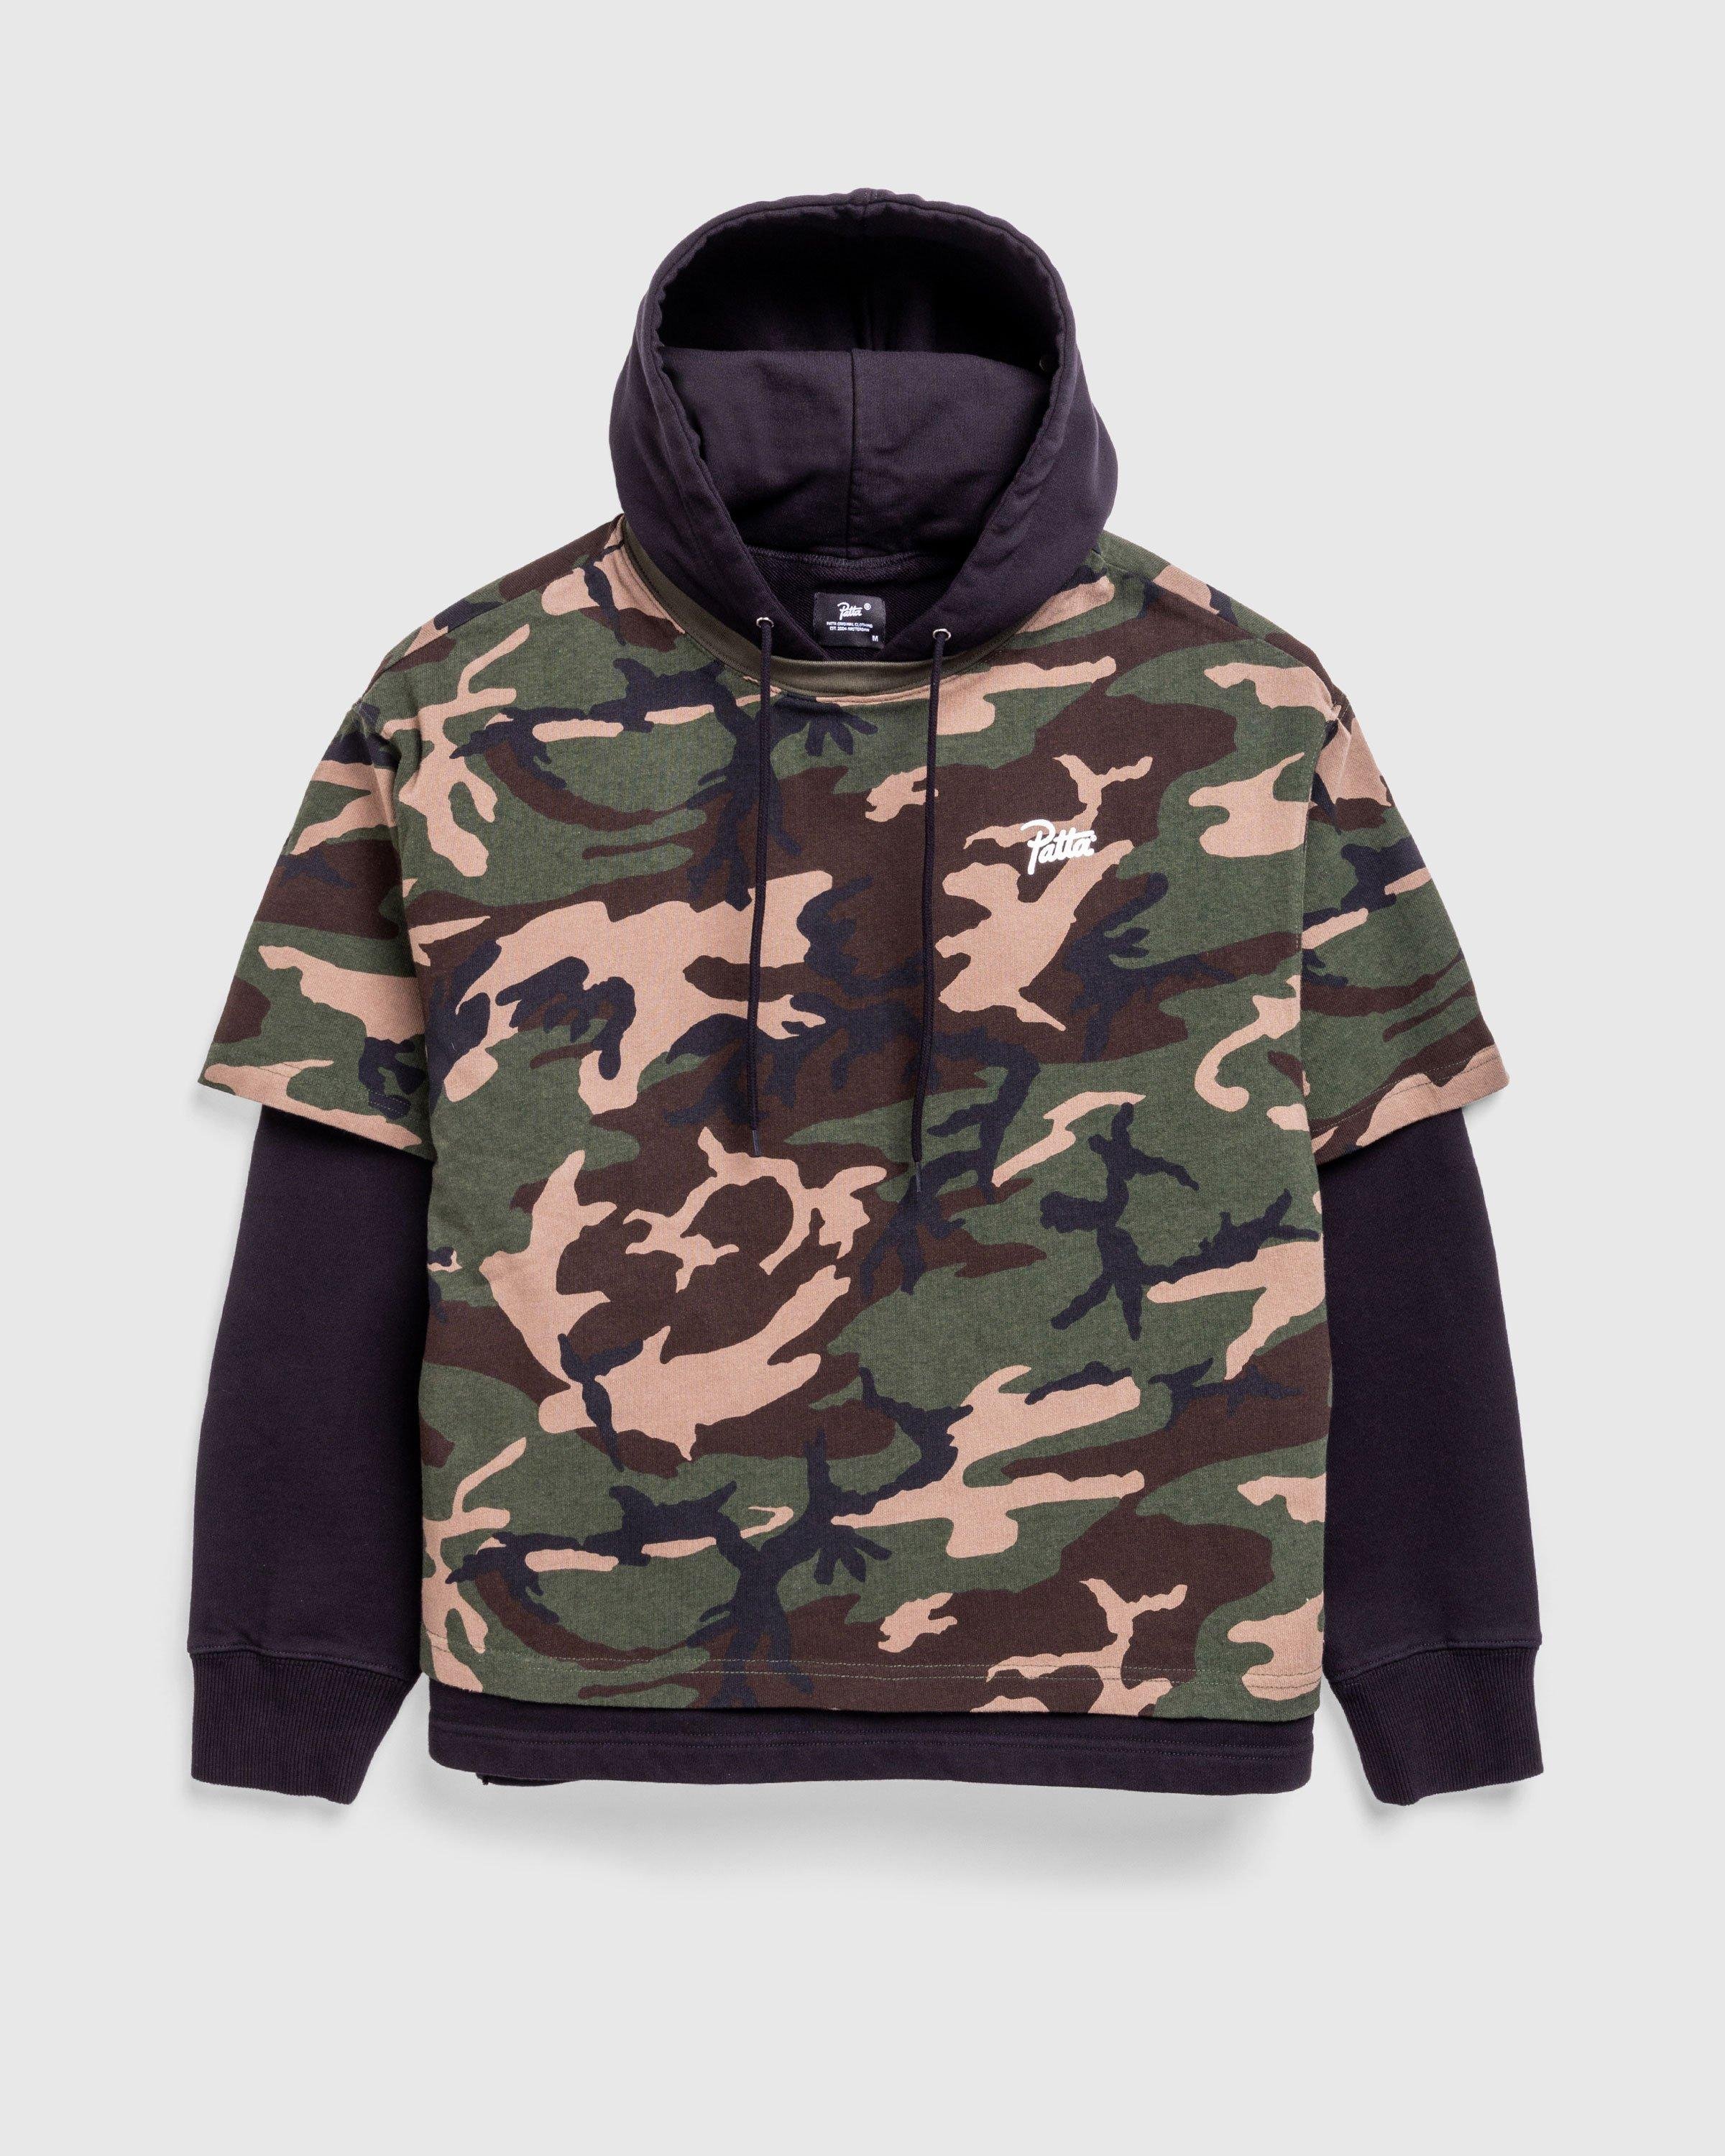 PattaAlways On Top Hooded Sweater Multi by HIGHSNOBIETY